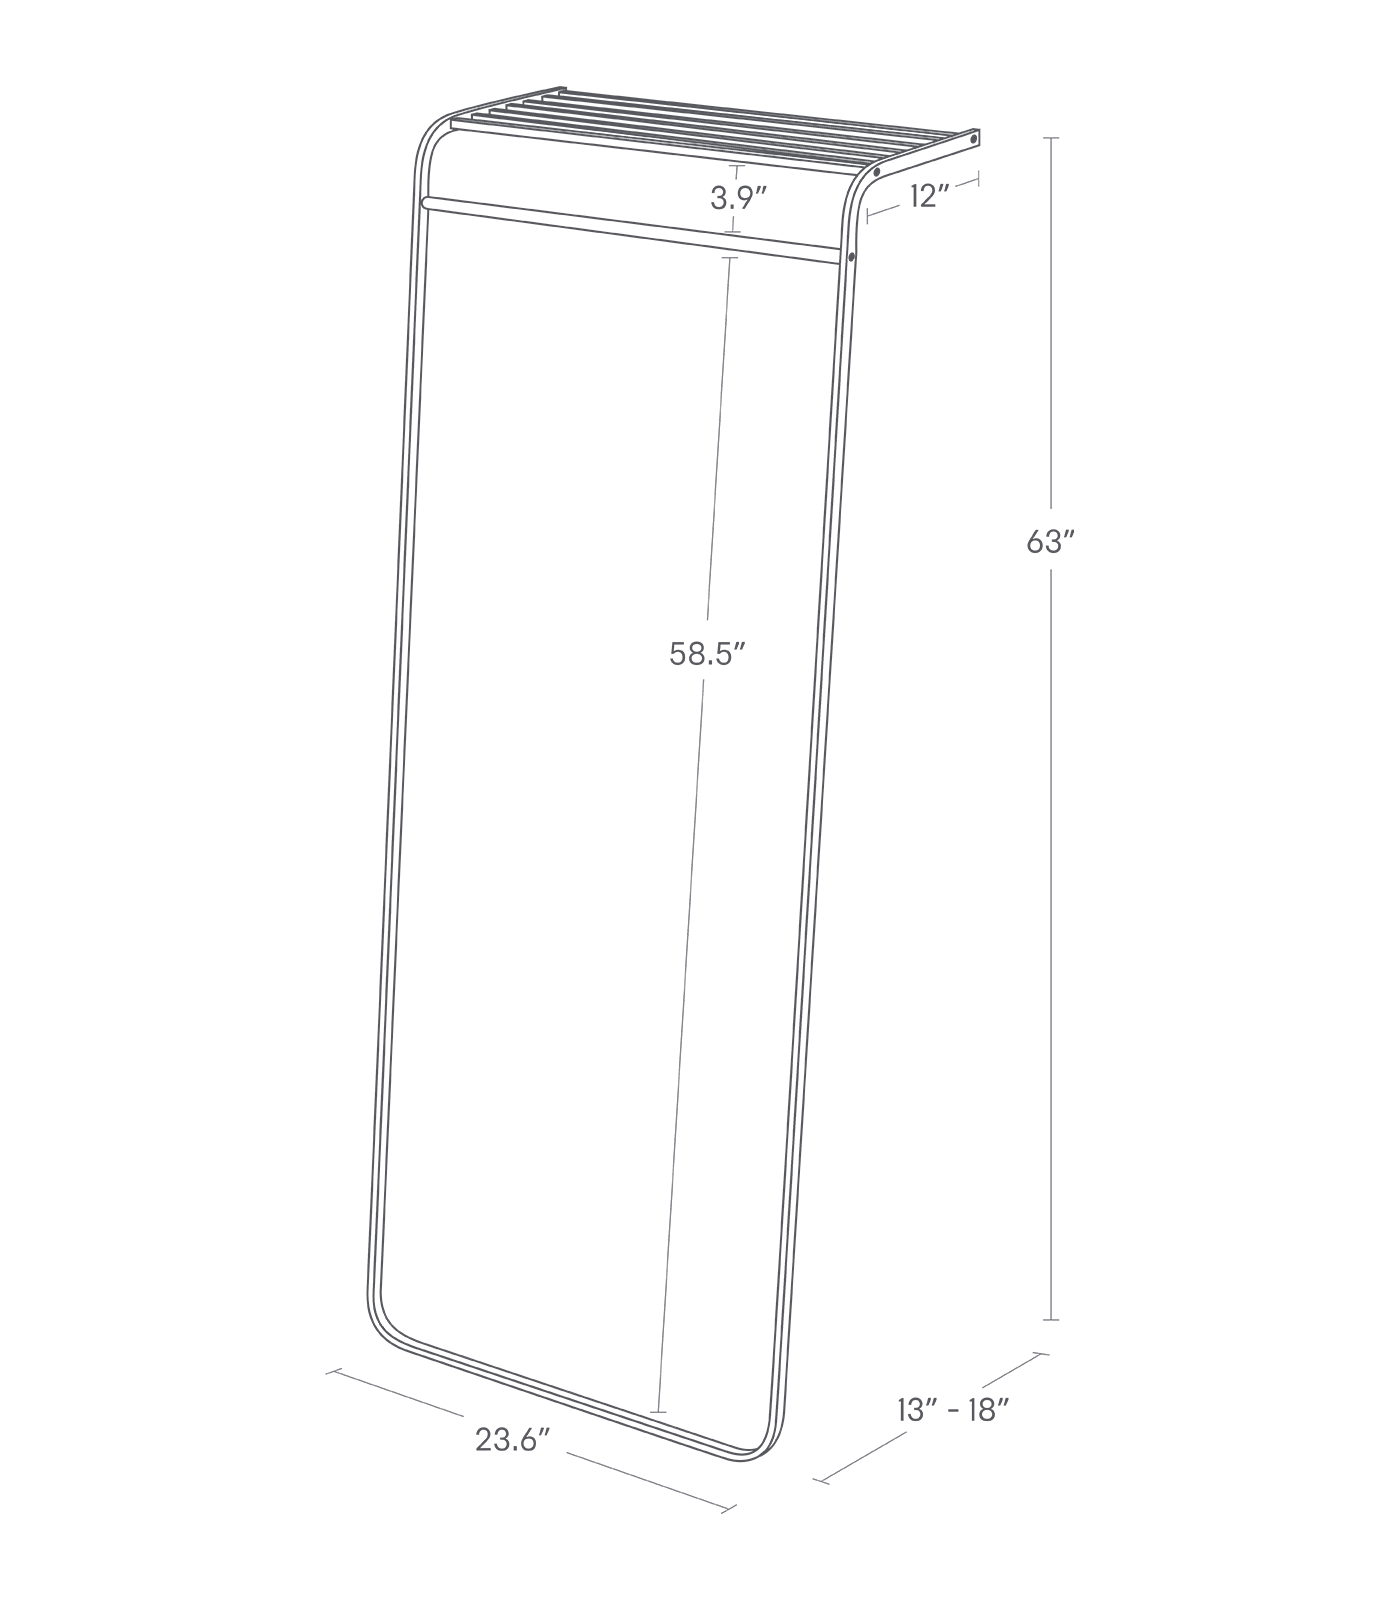 Dimension image for Leaning Coat Rack with Shelf on a white background including dimensions  L 18.11 x W 23.62 x H 62.99 inches